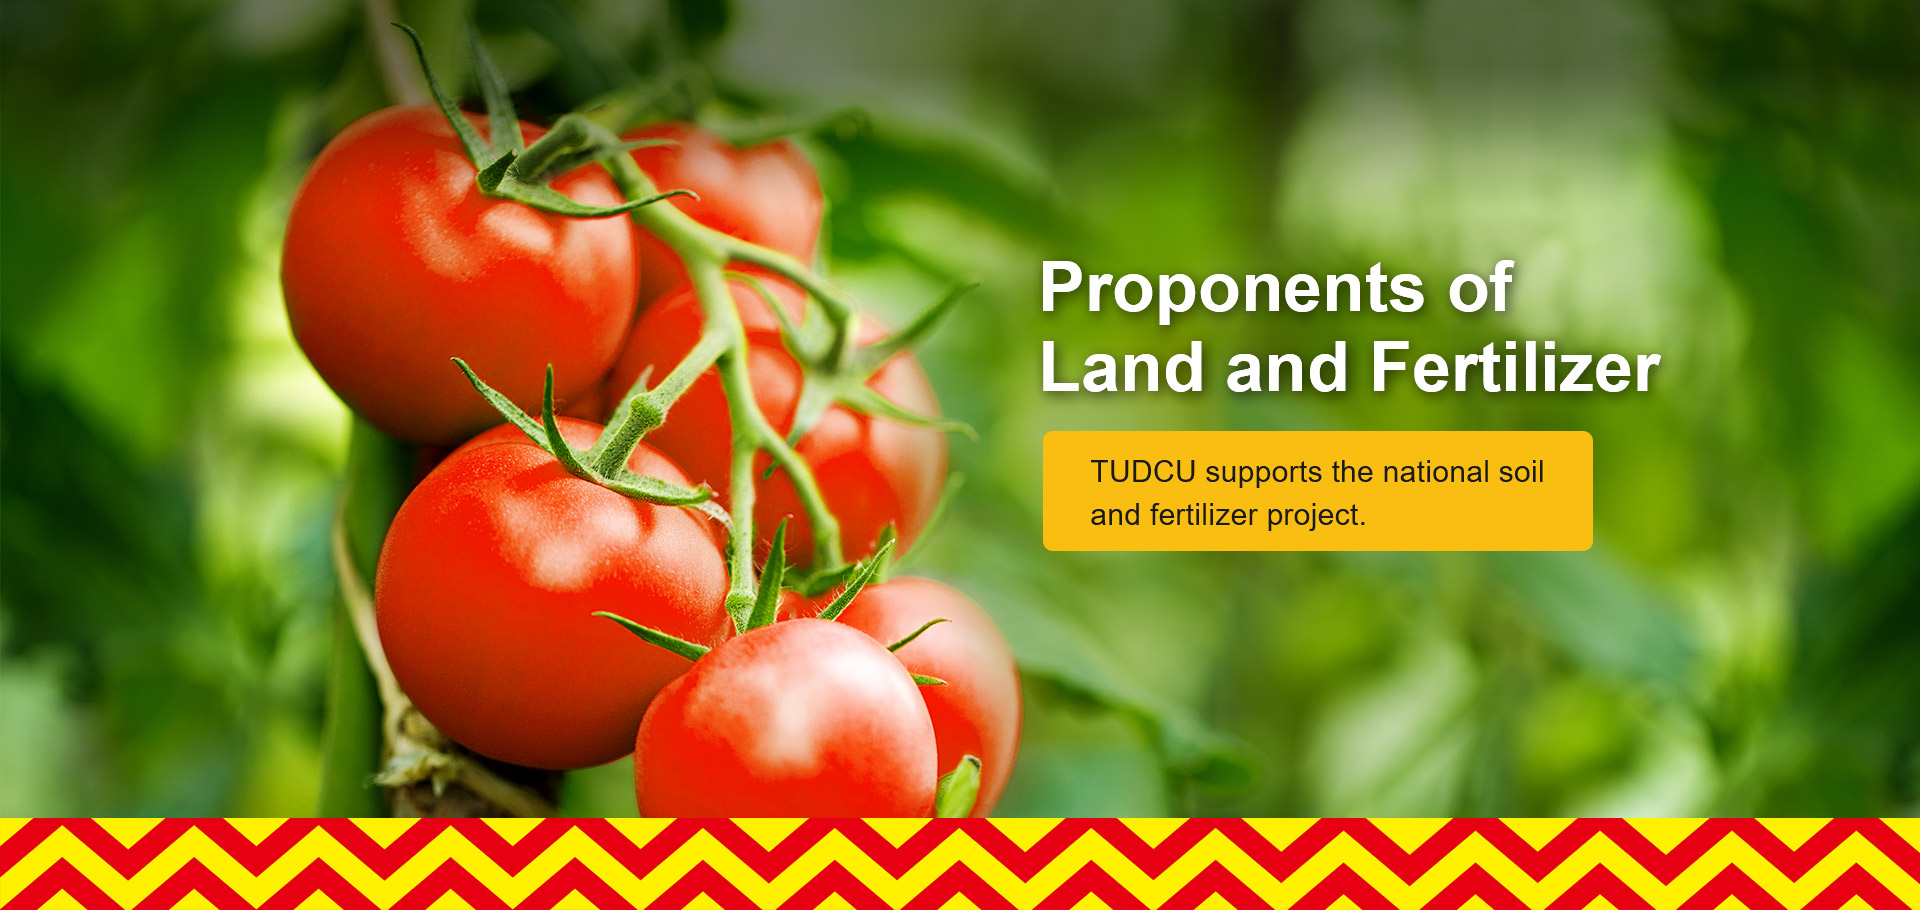 TUDCU supports the national soil and fertilizer project.